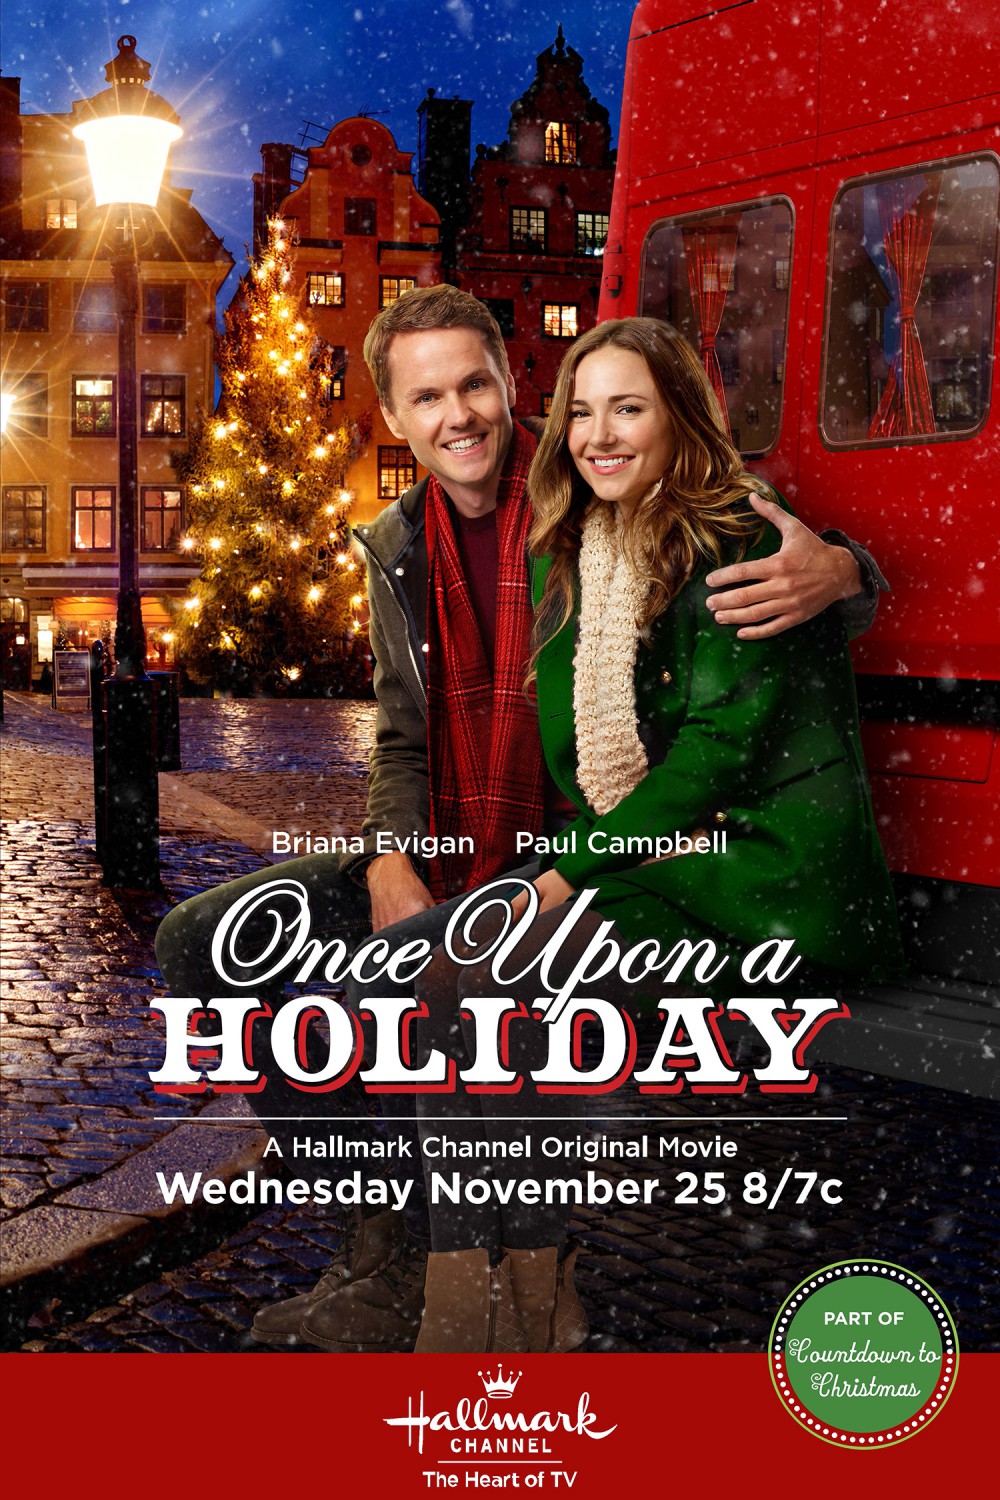 Once Upon a Holiday : Extra Large Movie Poster Image - IMP ...